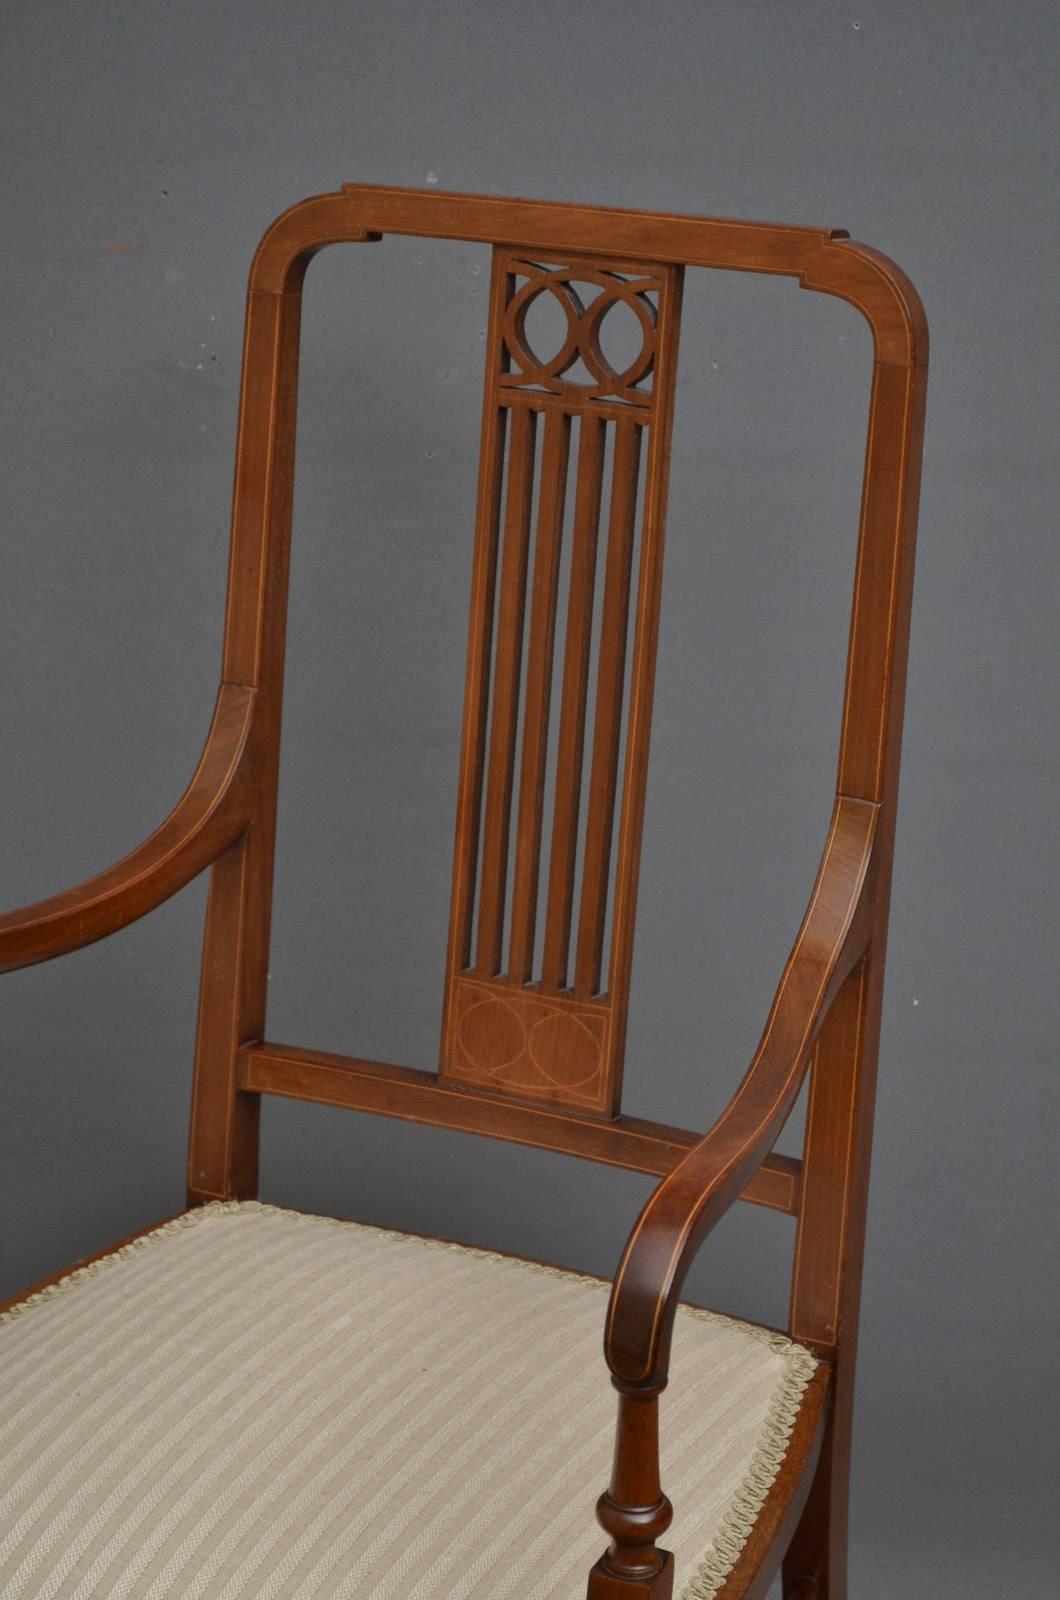 Sn4181 Elegant Edwardian mahogany and inlaid chair in wonderful condition throughout, circa 1900
Measures: H 16.5”, seat H 40